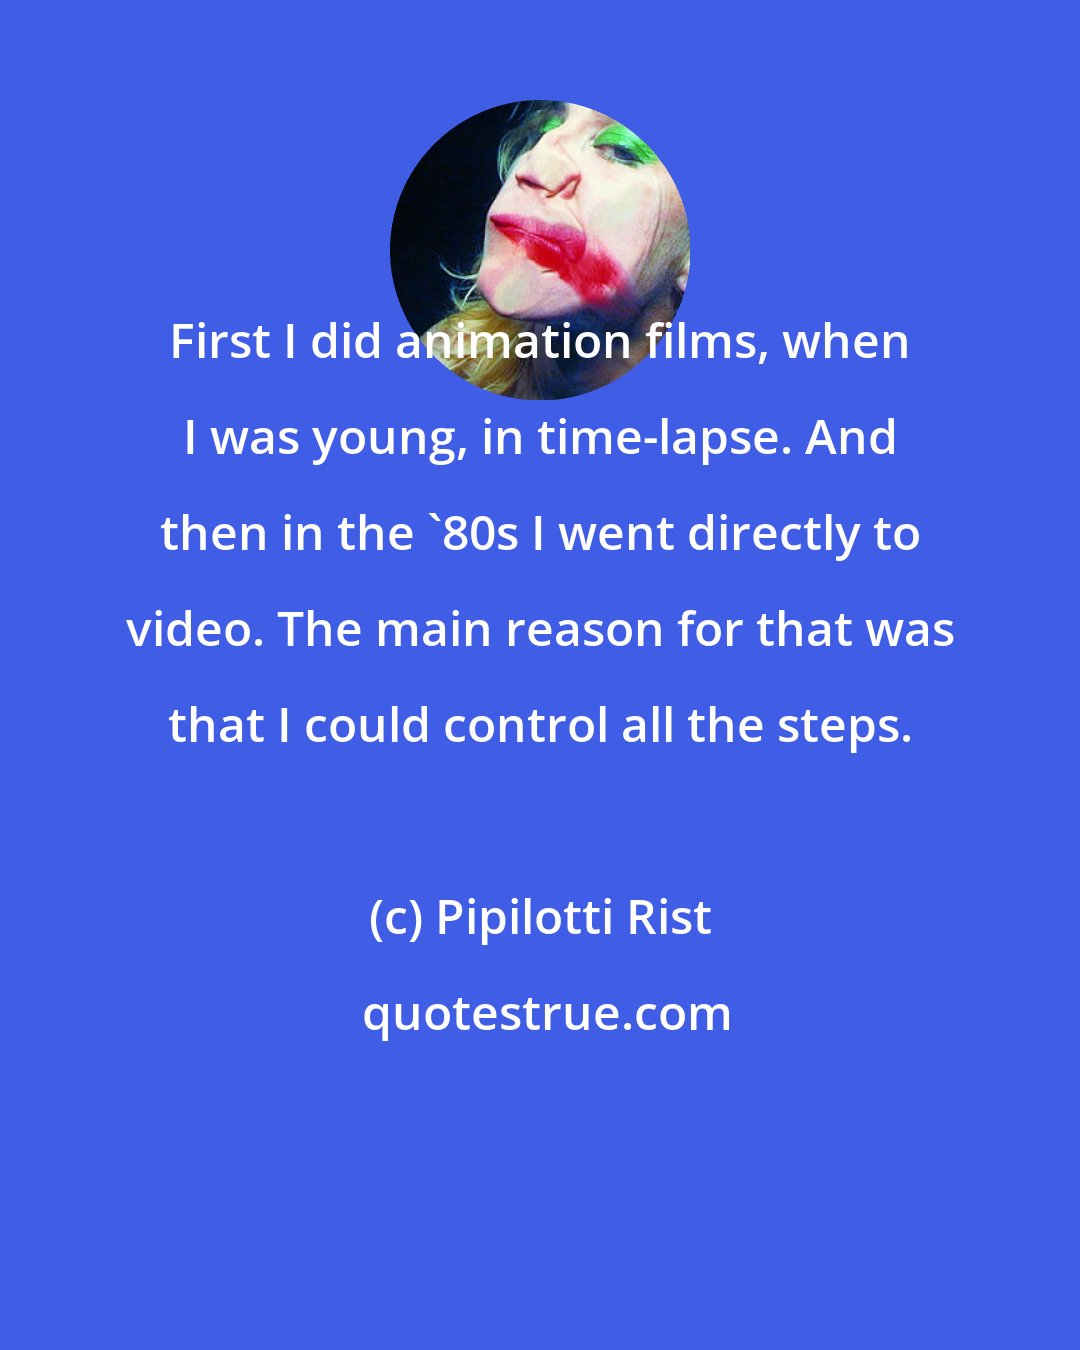 Pipilotti Rist: First I did animation films, when I was young, in time-lapse. And then in the '80s I went directly to video. The main reason for that was that I could control all the steps.